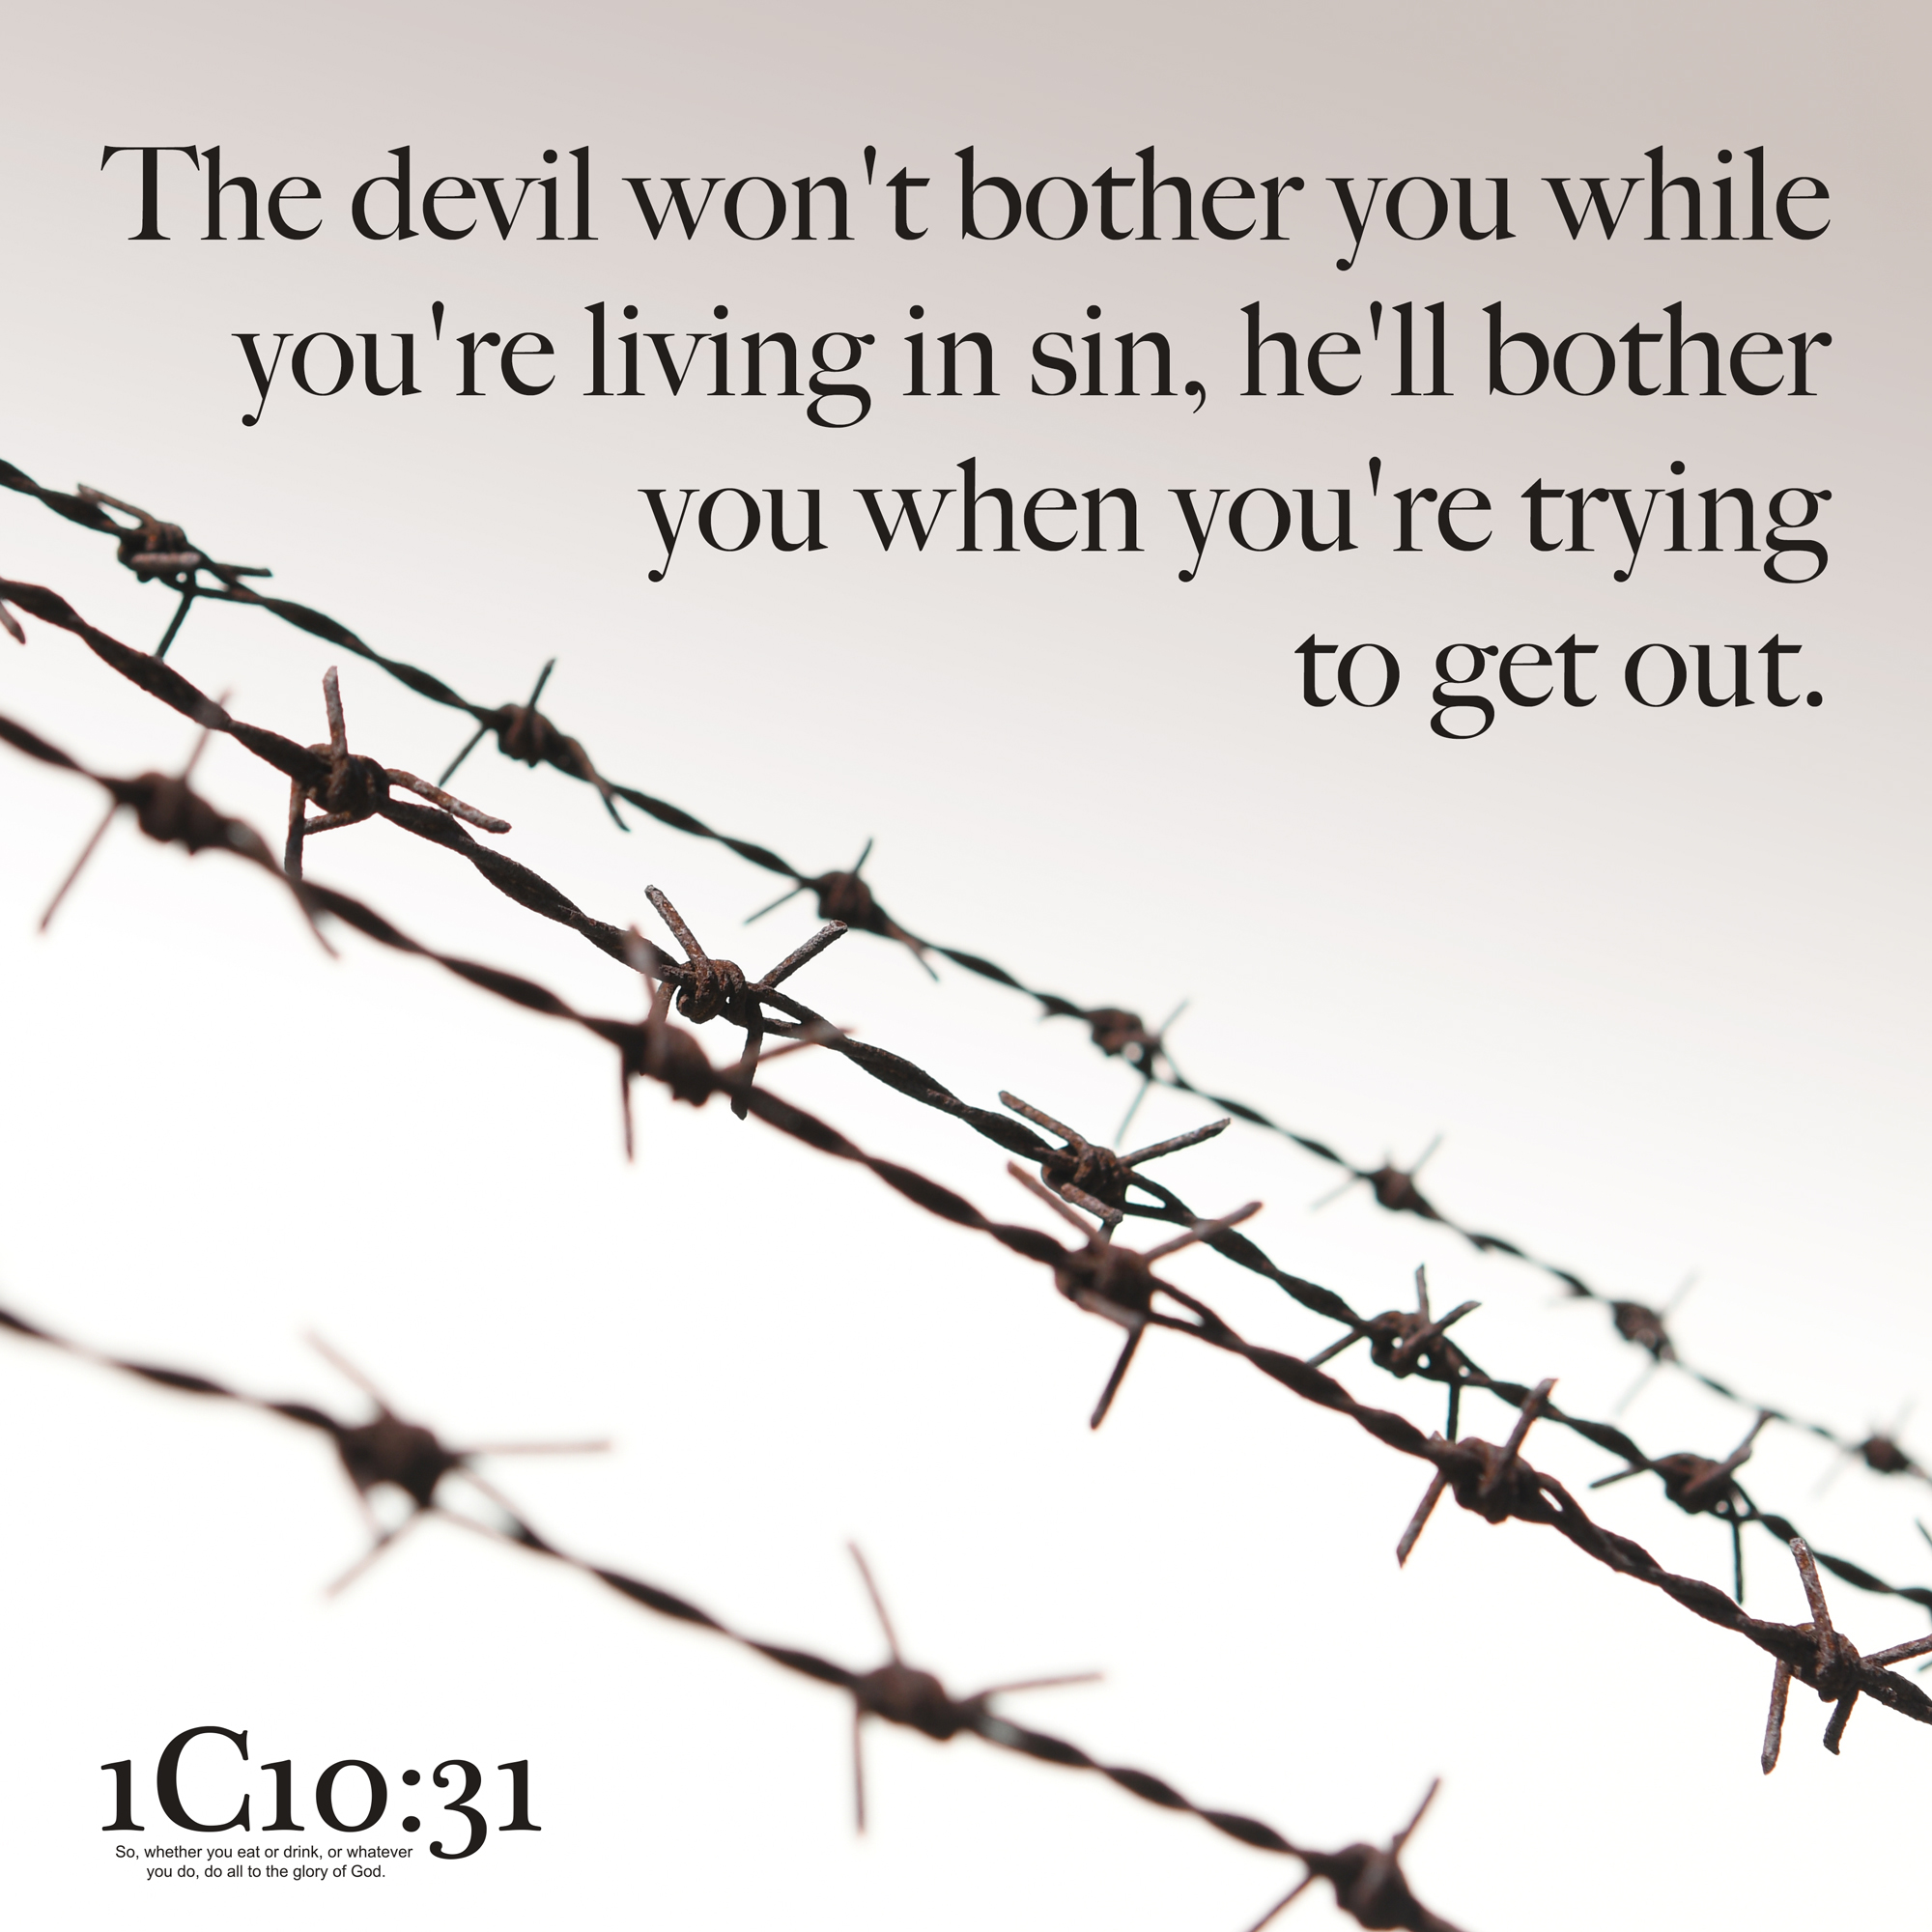 The devil won't bother you while you're living in sin, he'll bother you when you're trying to get out.